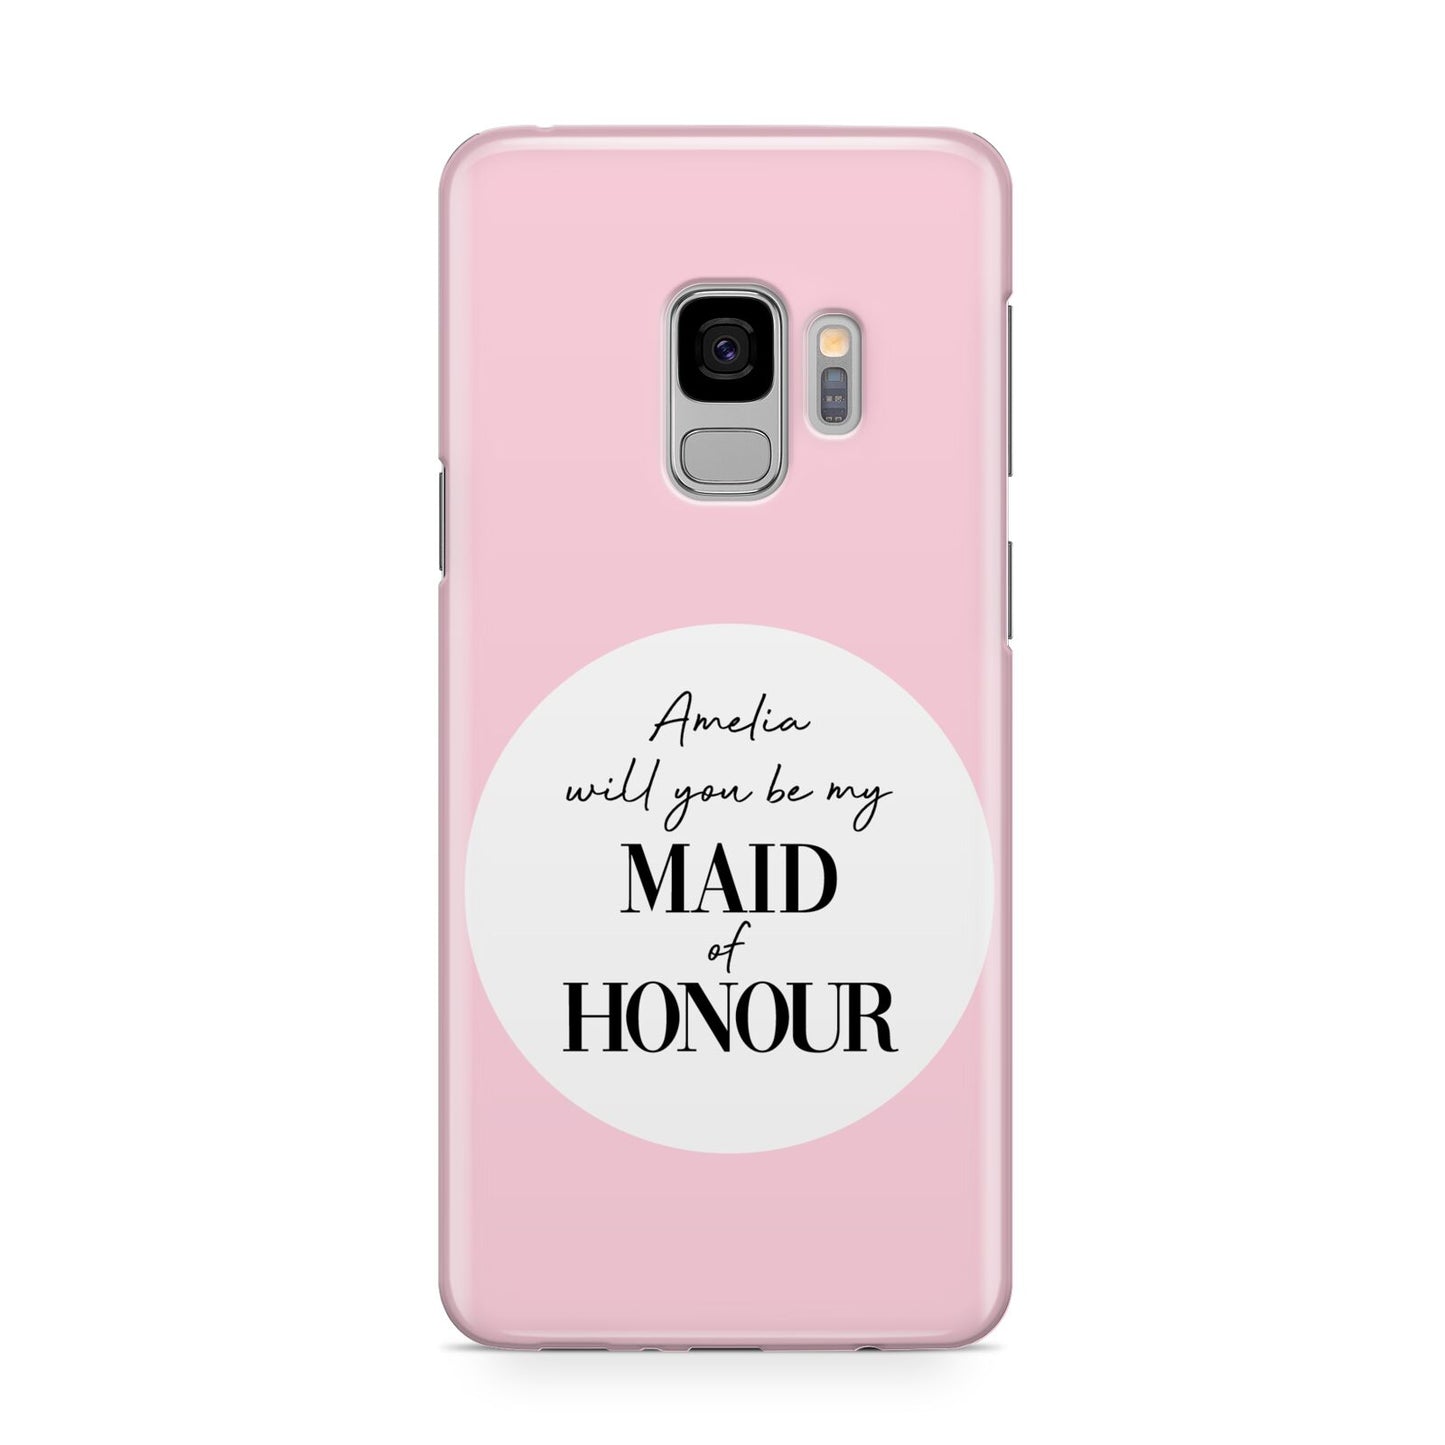 Will You Be My Maid Of Honour Samsung Galaxy S9 Case